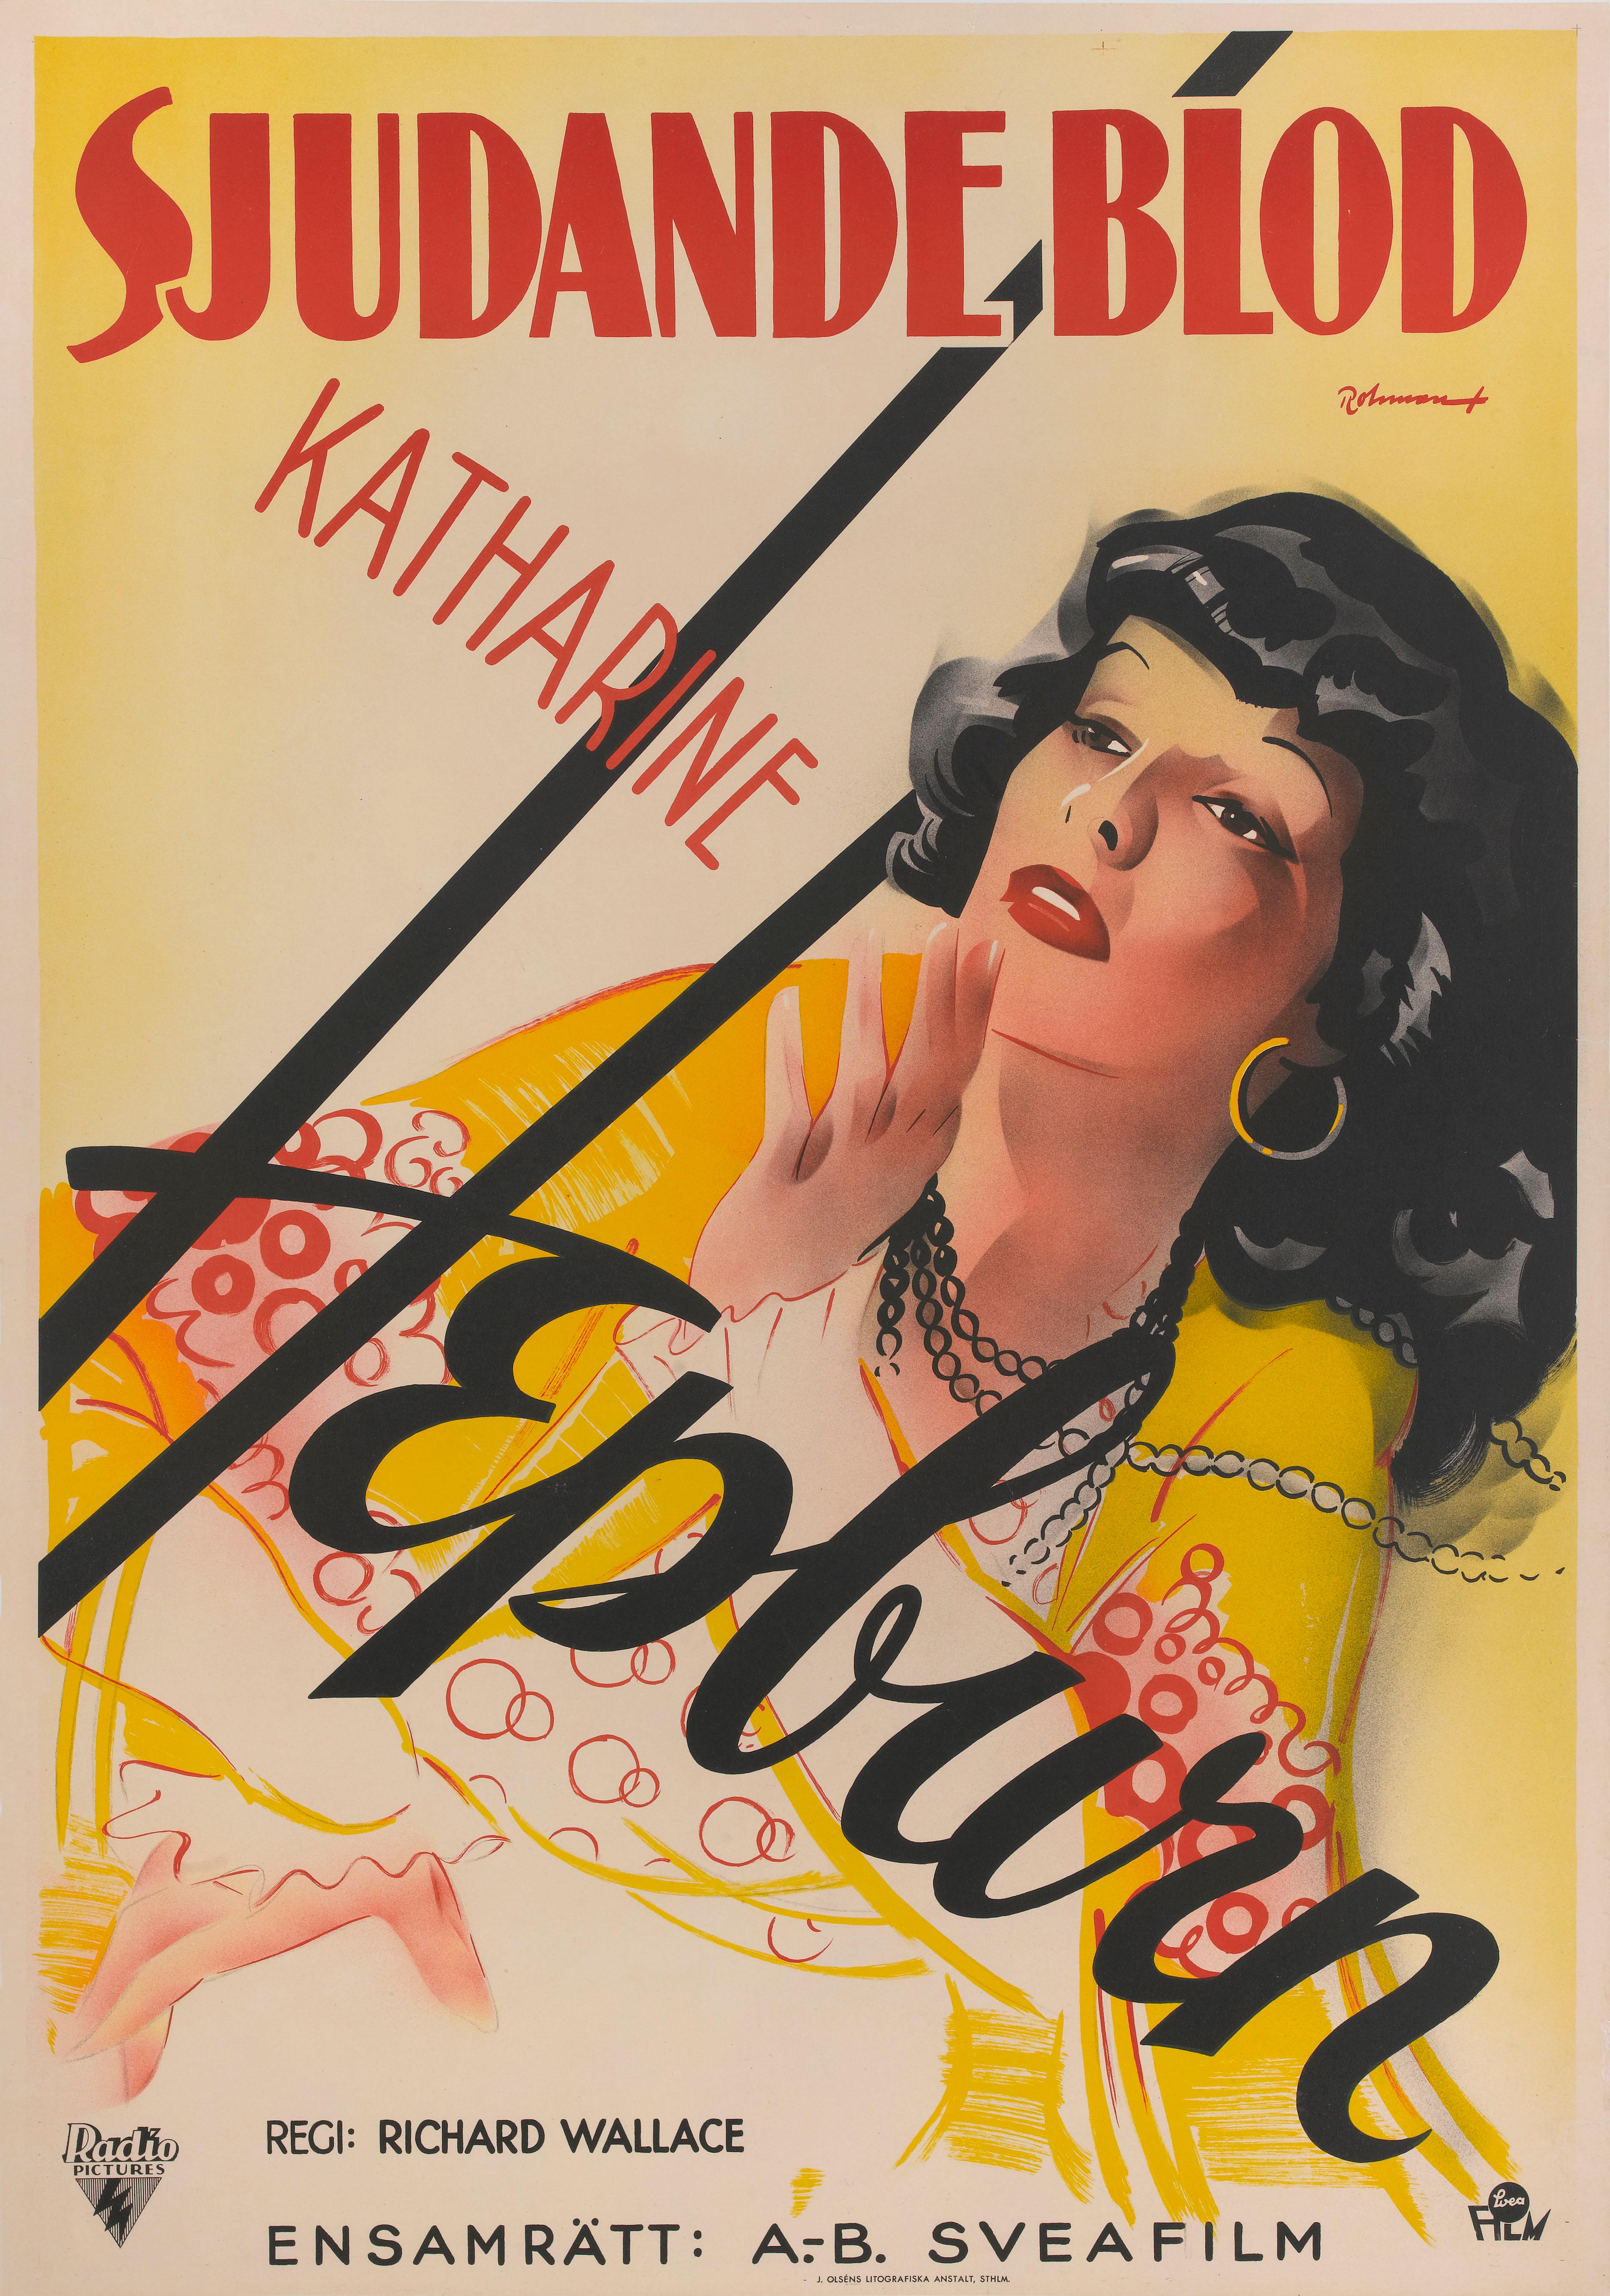 Original Swedish film poster for American drama romance film The Little Minister 1934.
The film was directed by Richard Wallace starred Katherine Hepburn.
This beautiful Swedish poster was created by Eric Rohman (1891-1949) for the films first